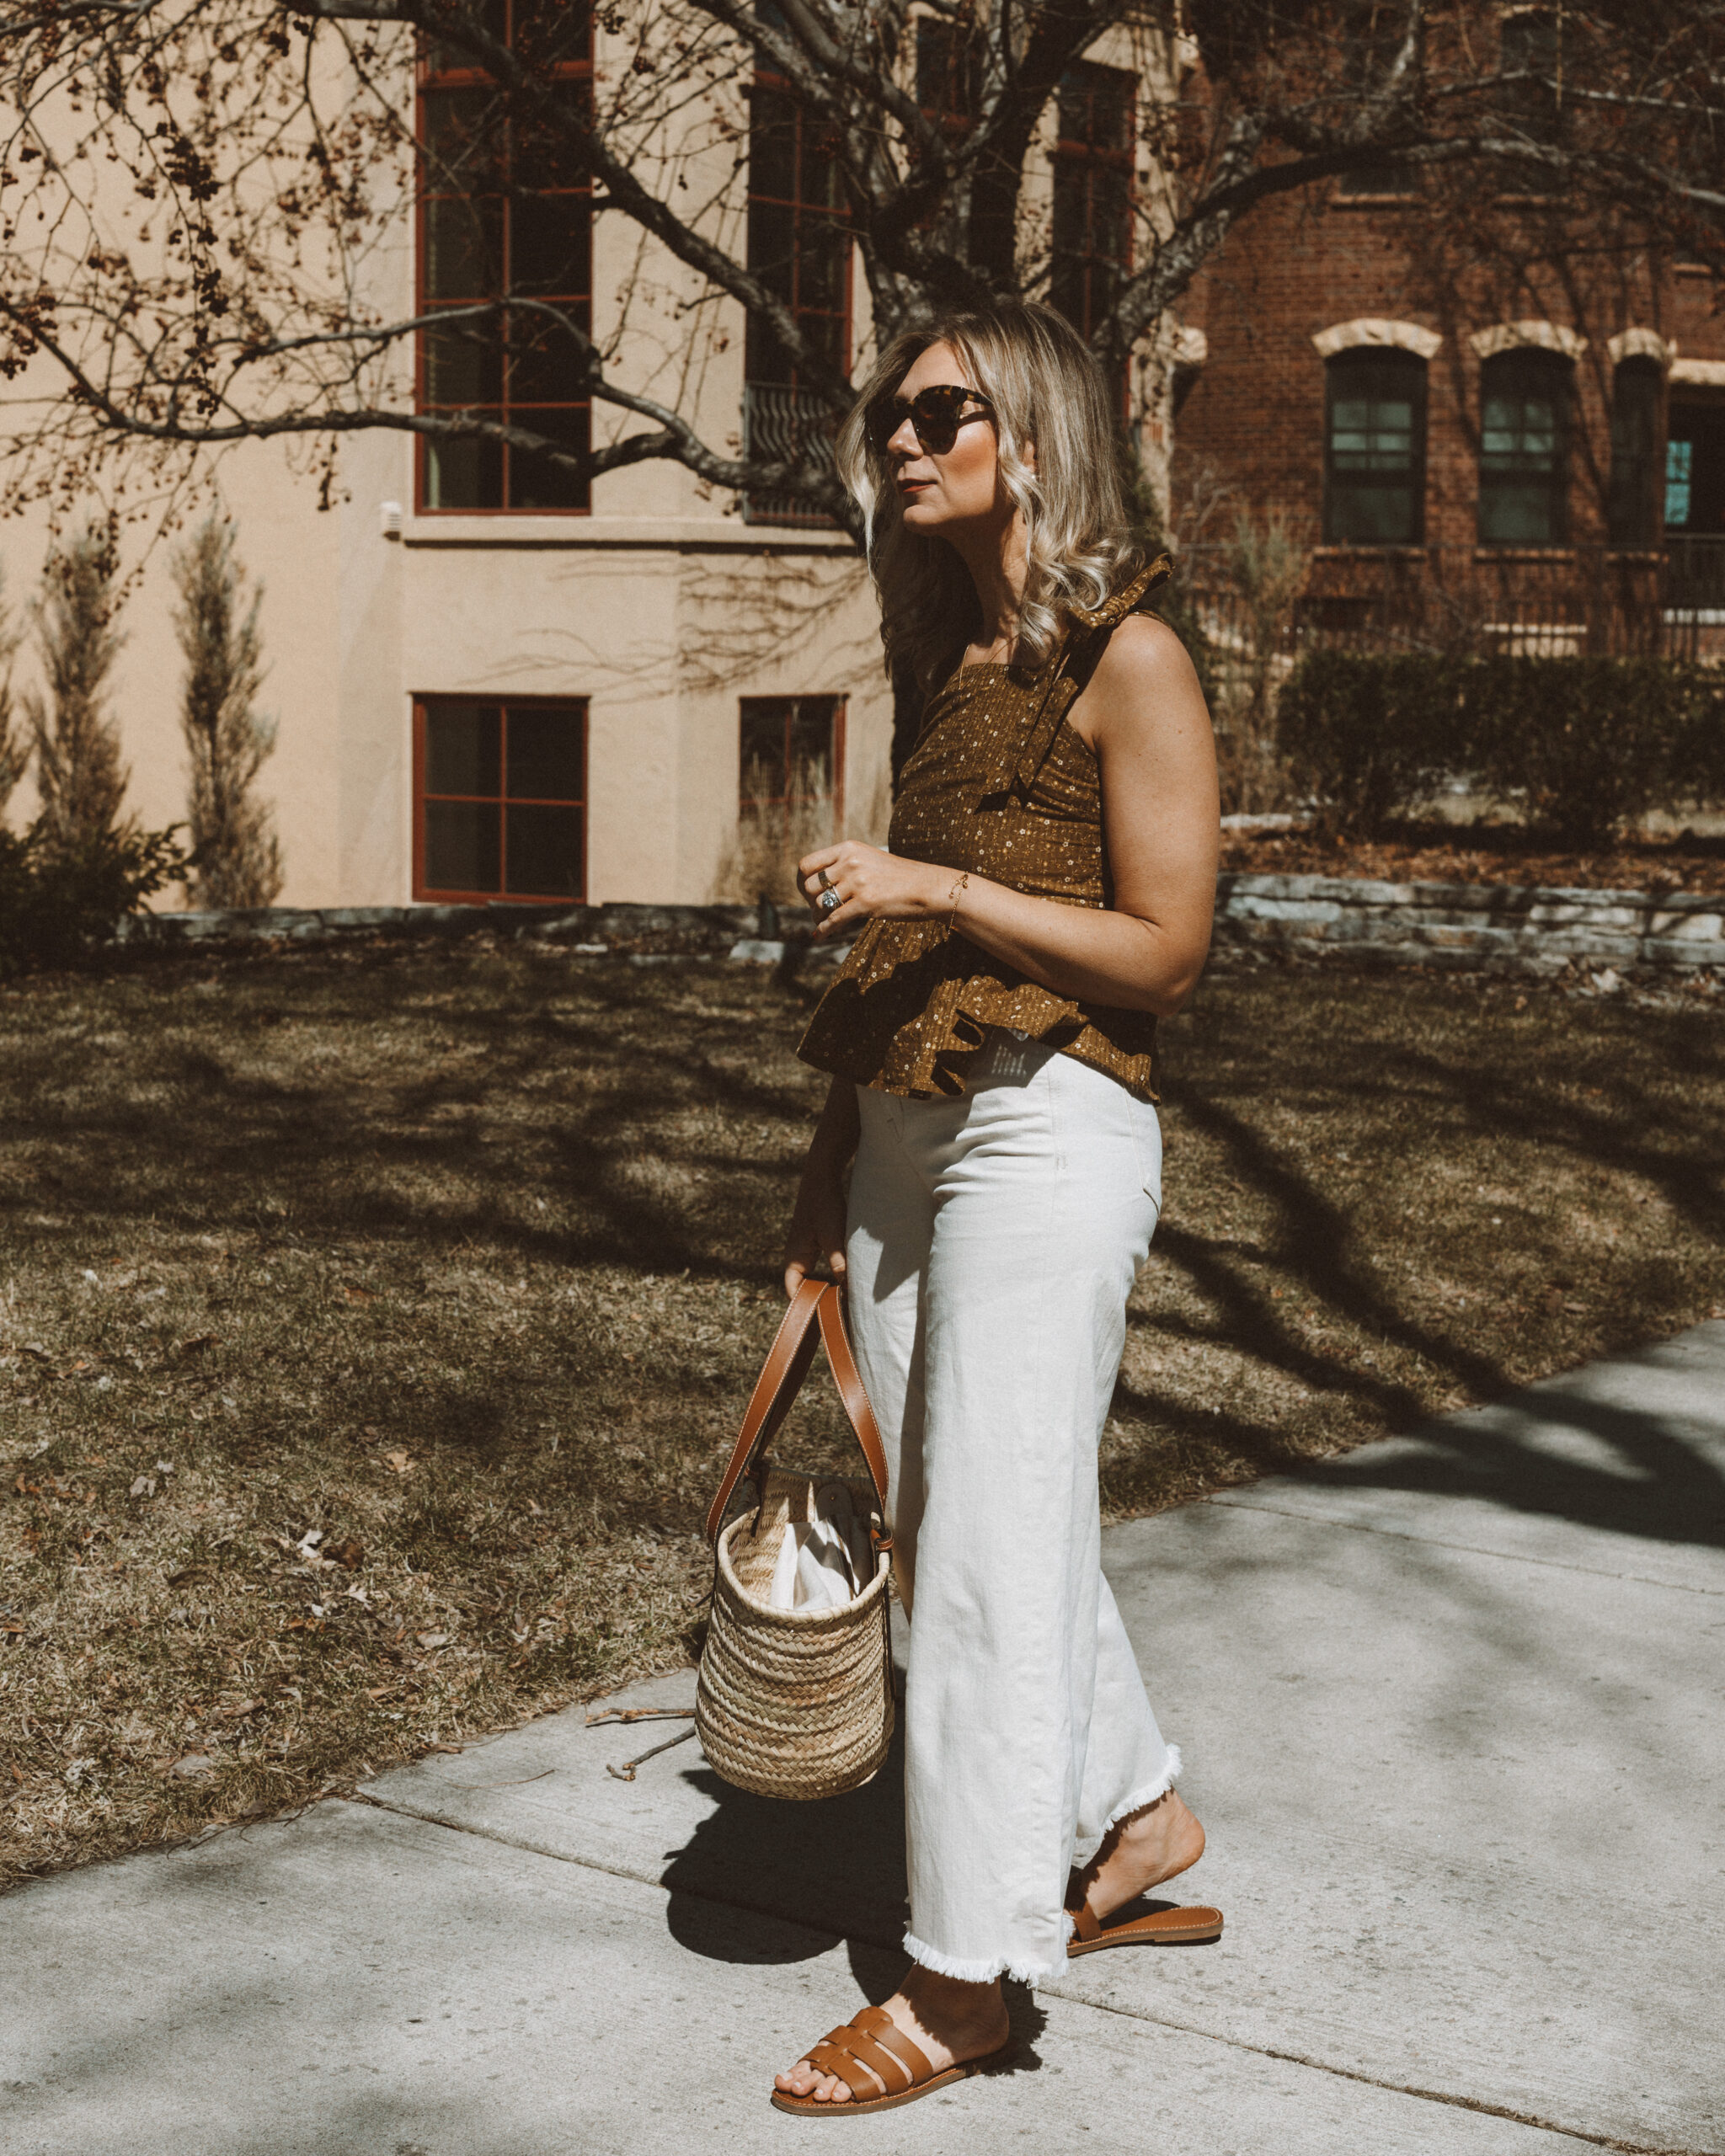 Karin Emily wears a peplum top from Madewell, a pair of wide leg jeans from AYR, a Poolside Basket Bag and a pair of Fisherman sandal slides from Madewell